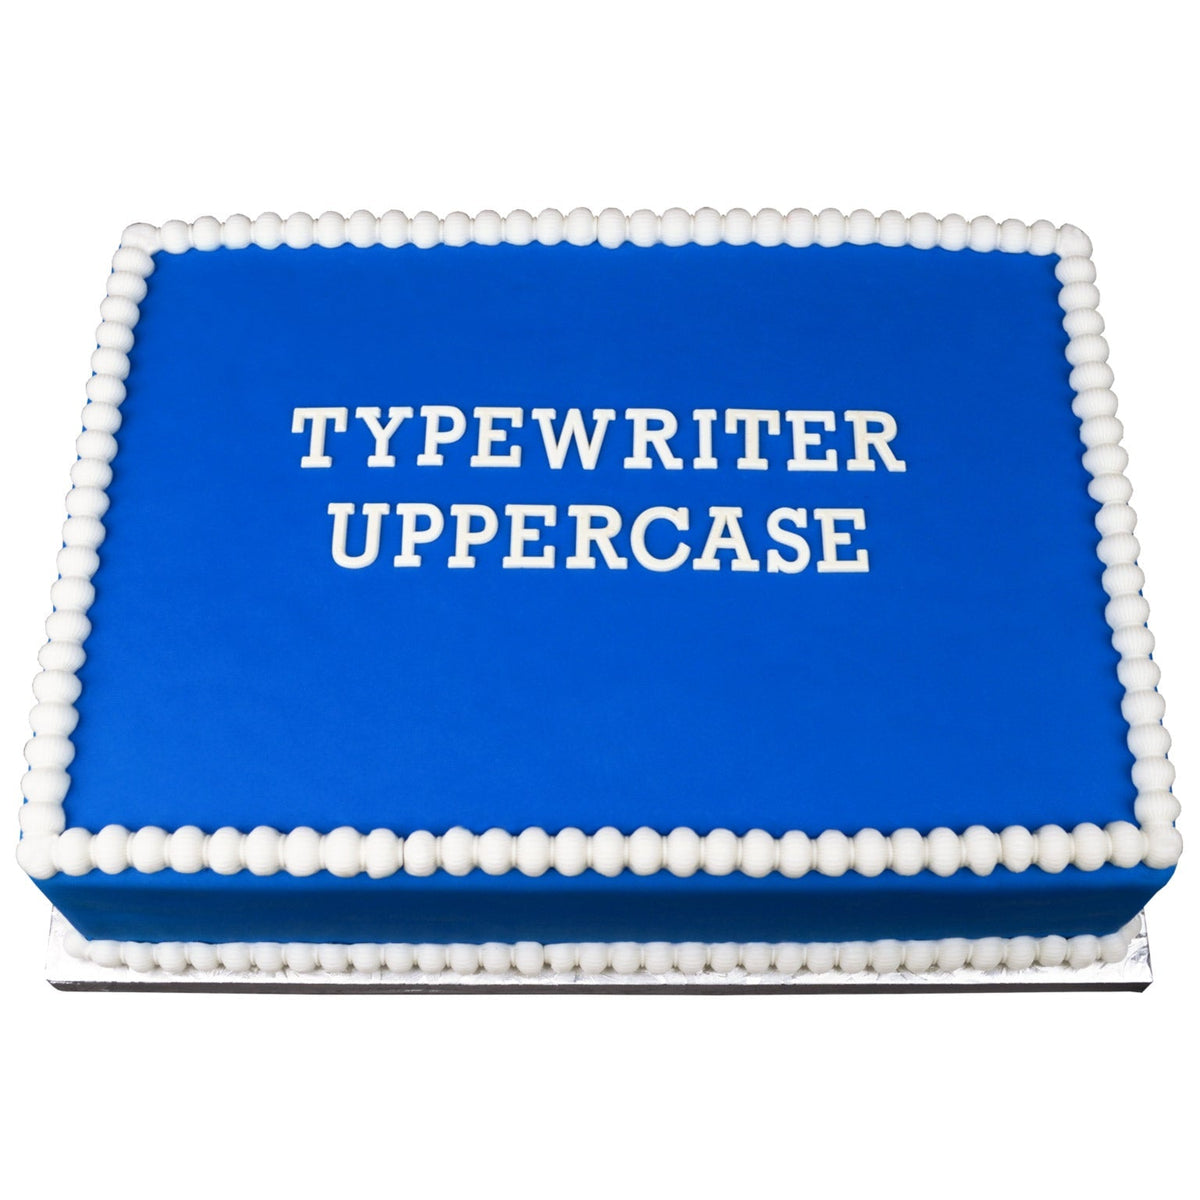 Decorated Cake using Typewriter Uppercase Flexabet Food Safe Silicone Letter Maker by Marvelous Molds